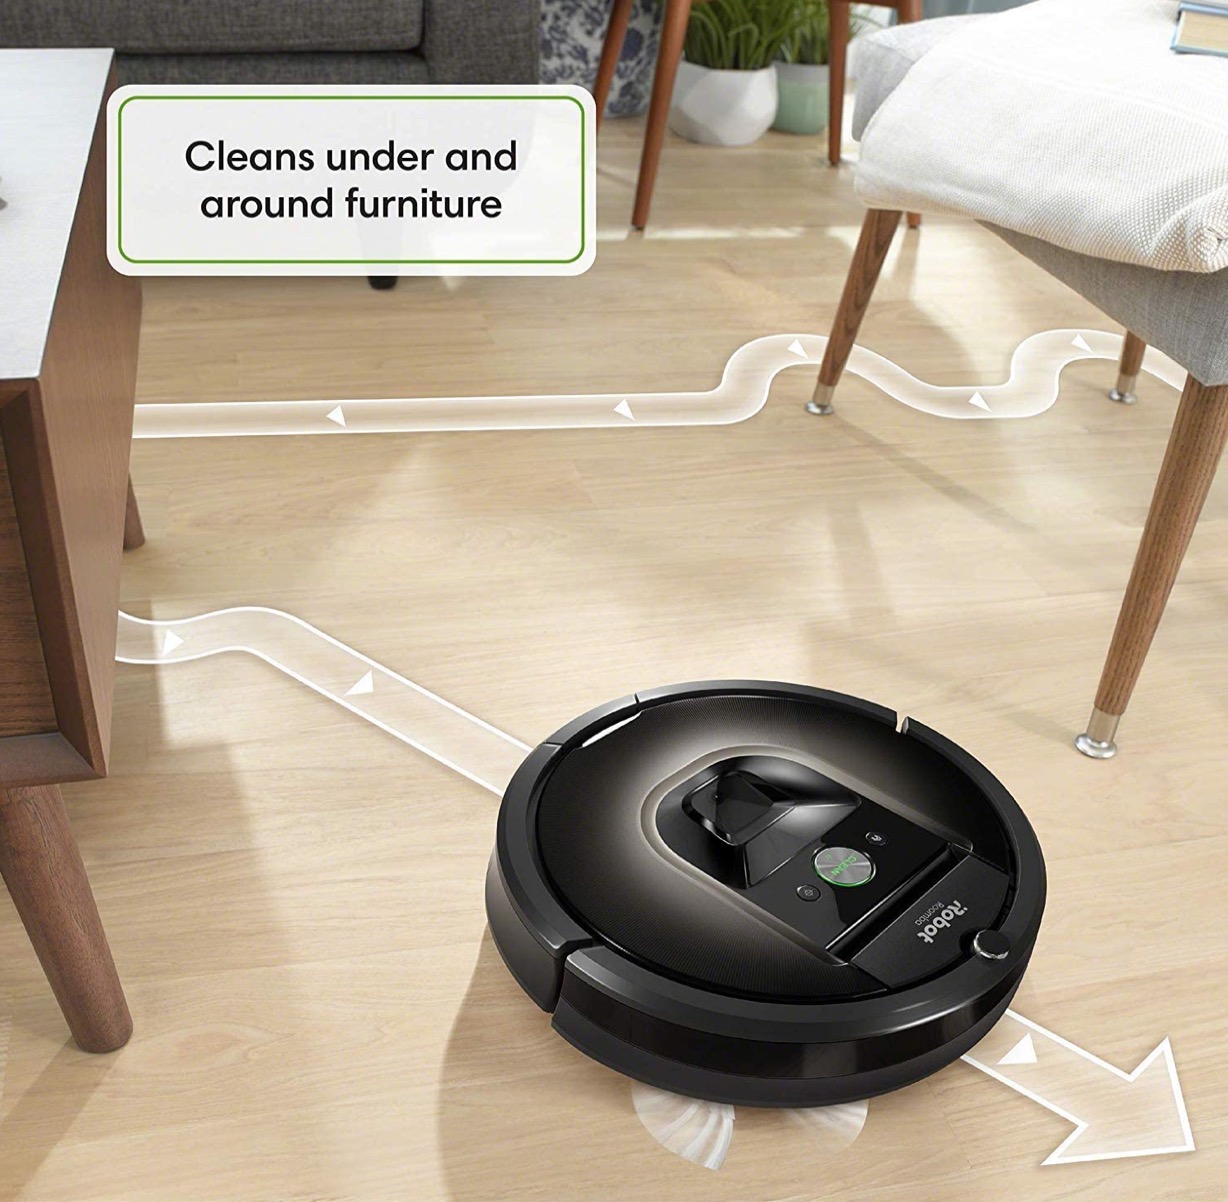 Buy a Refurbished Roomba 980 and Save $380 [Deal]